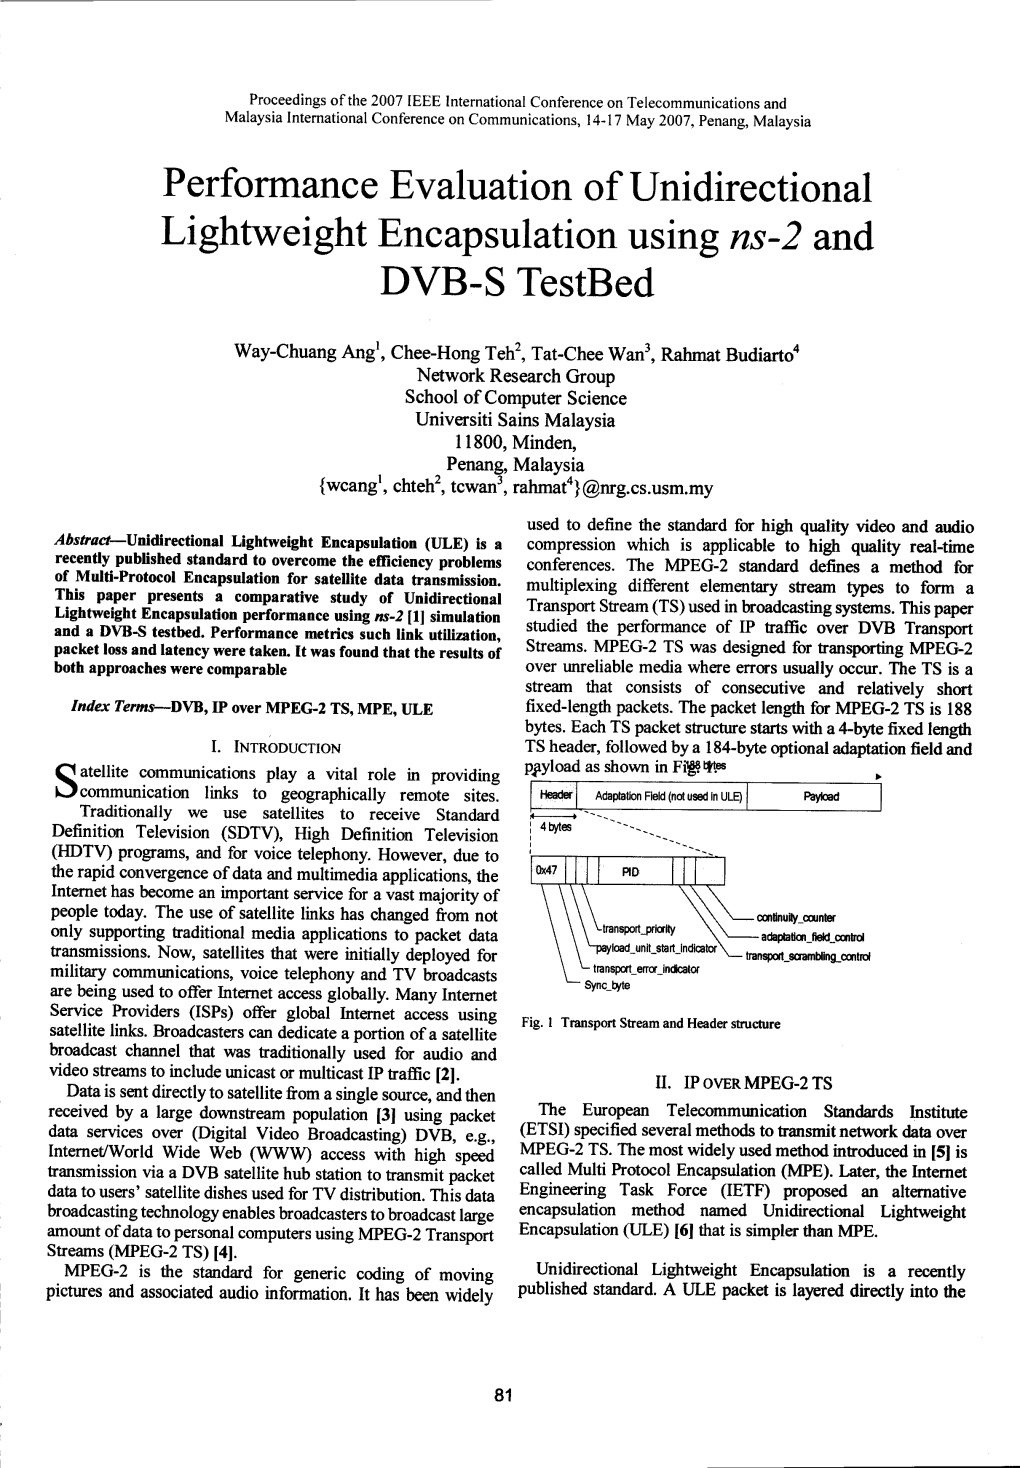 Perfonnance Evaluation of Unidirectional Lightweight Encapsulation Usin G Ns-2 and DVB-S Testbed